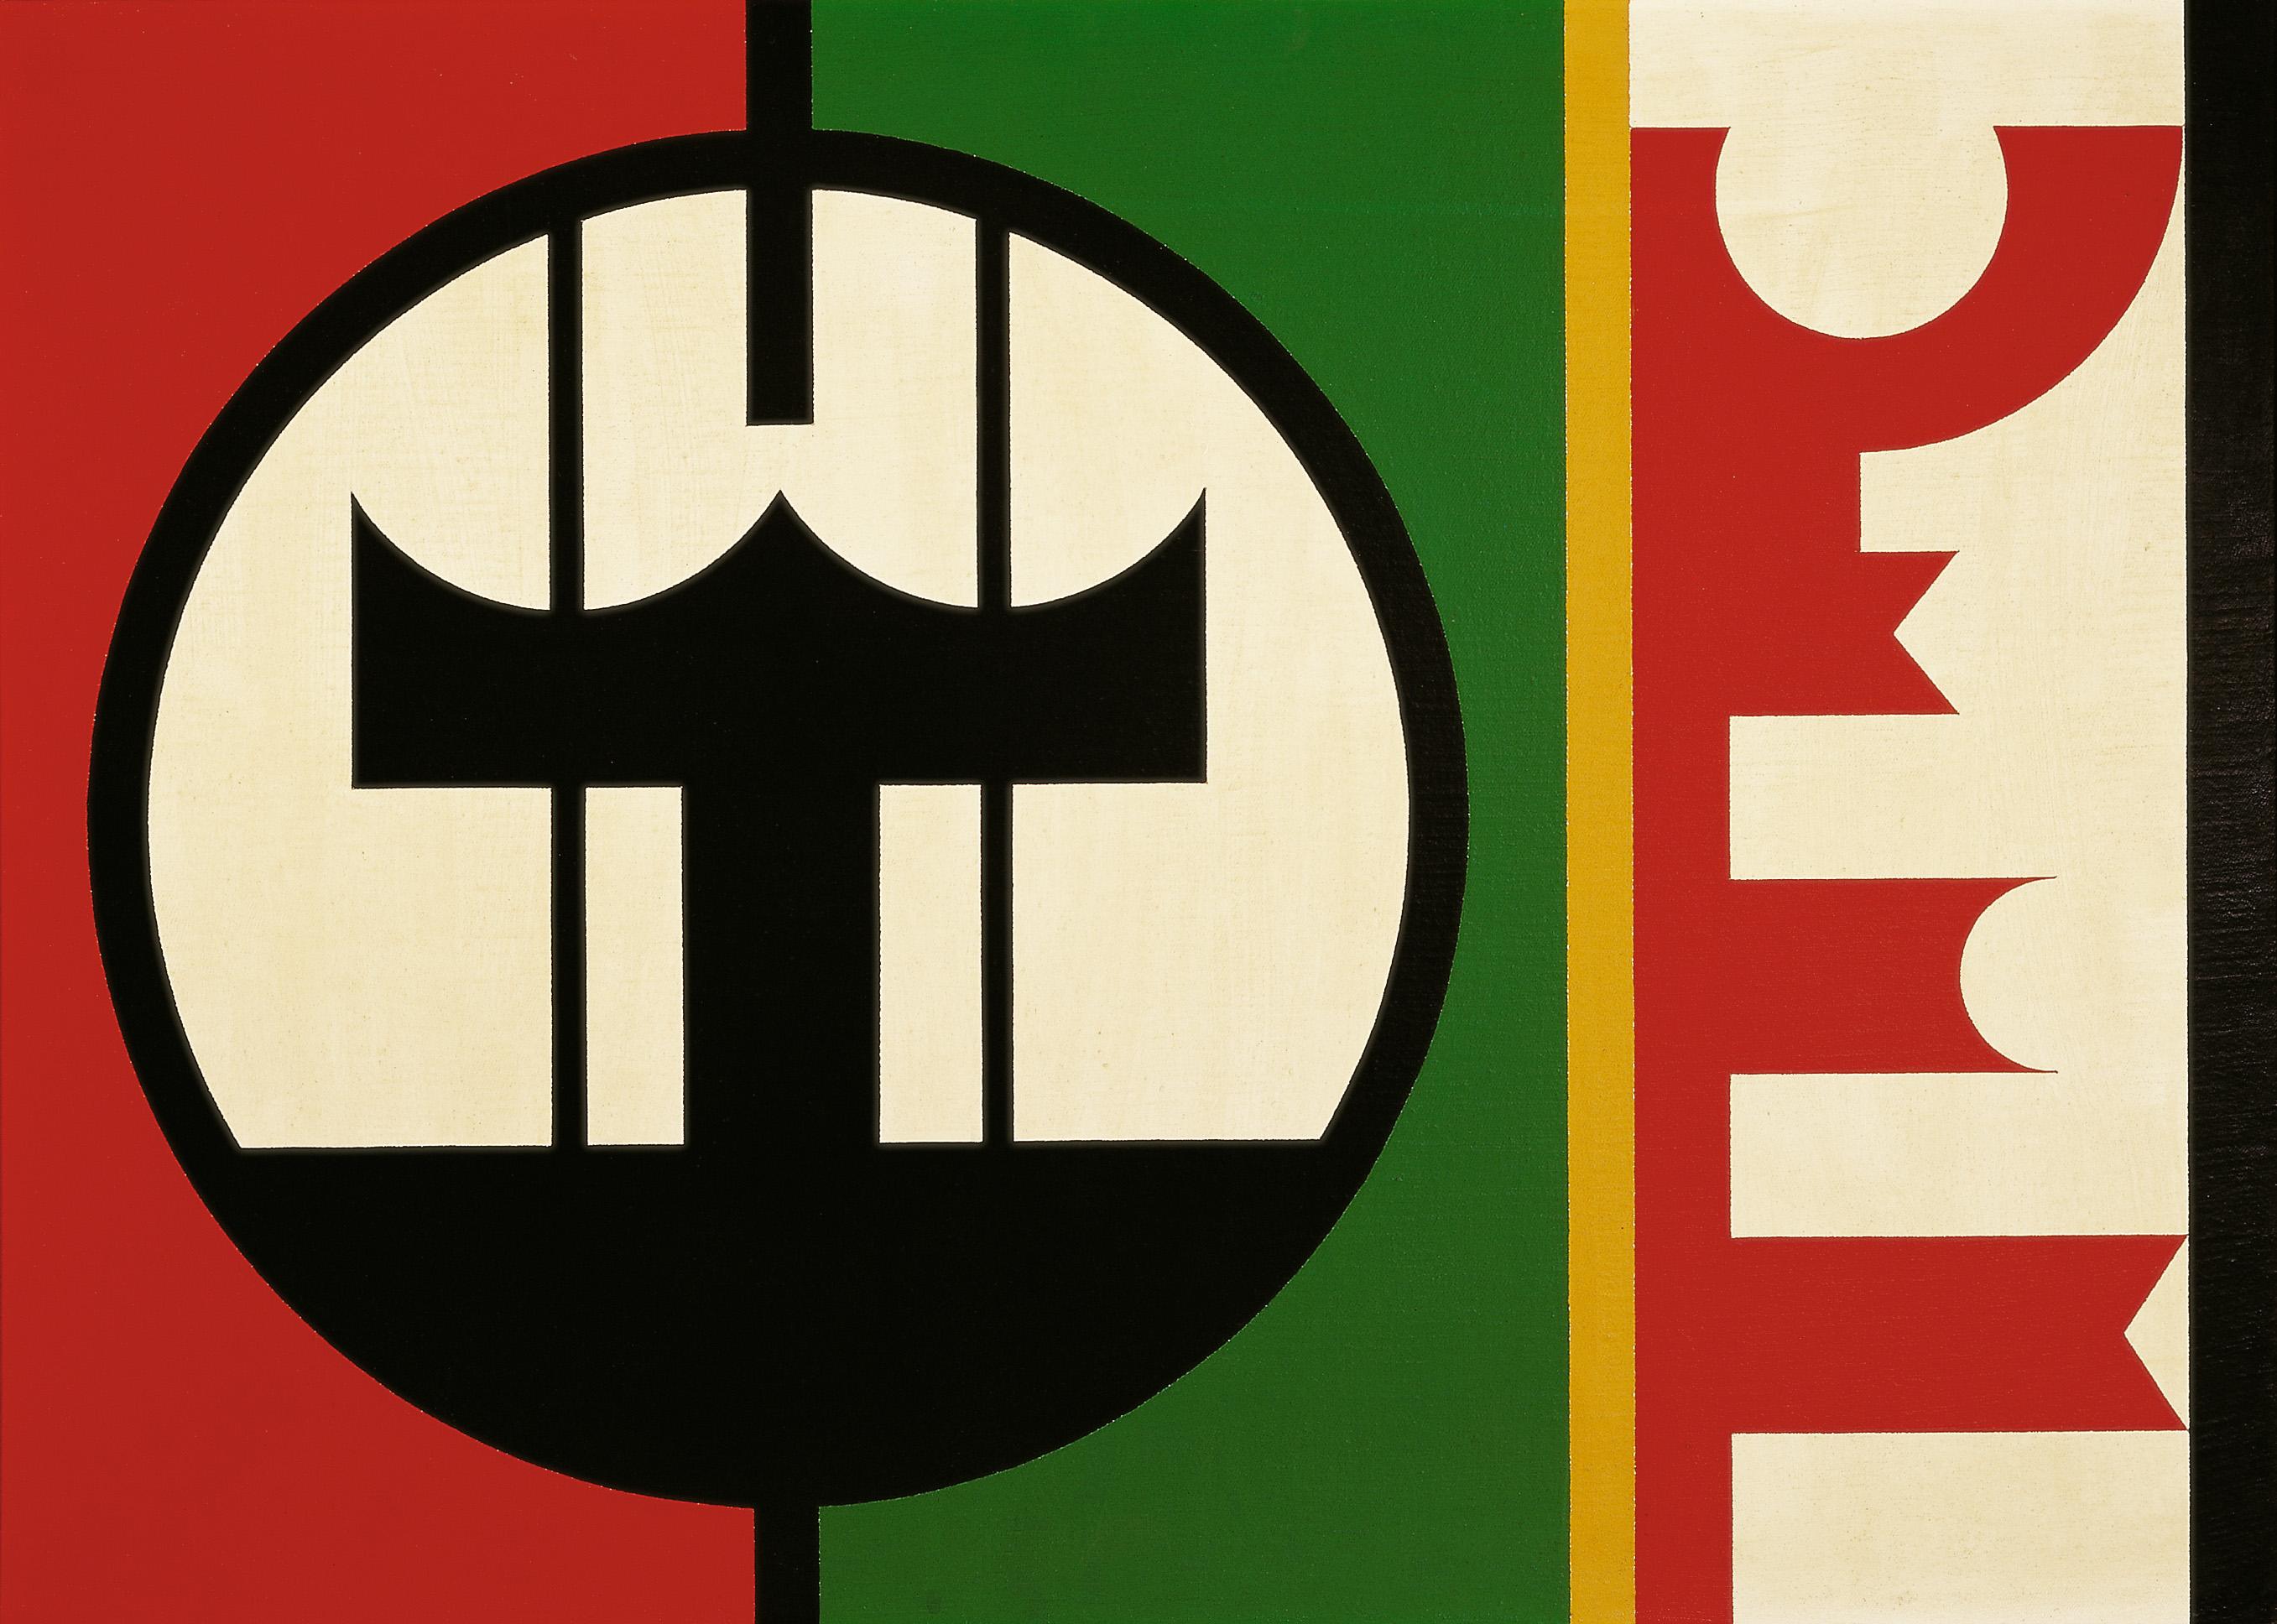 Some May Work as Symbols: Art Made in Brazil, 1950s–70s | Raven Row